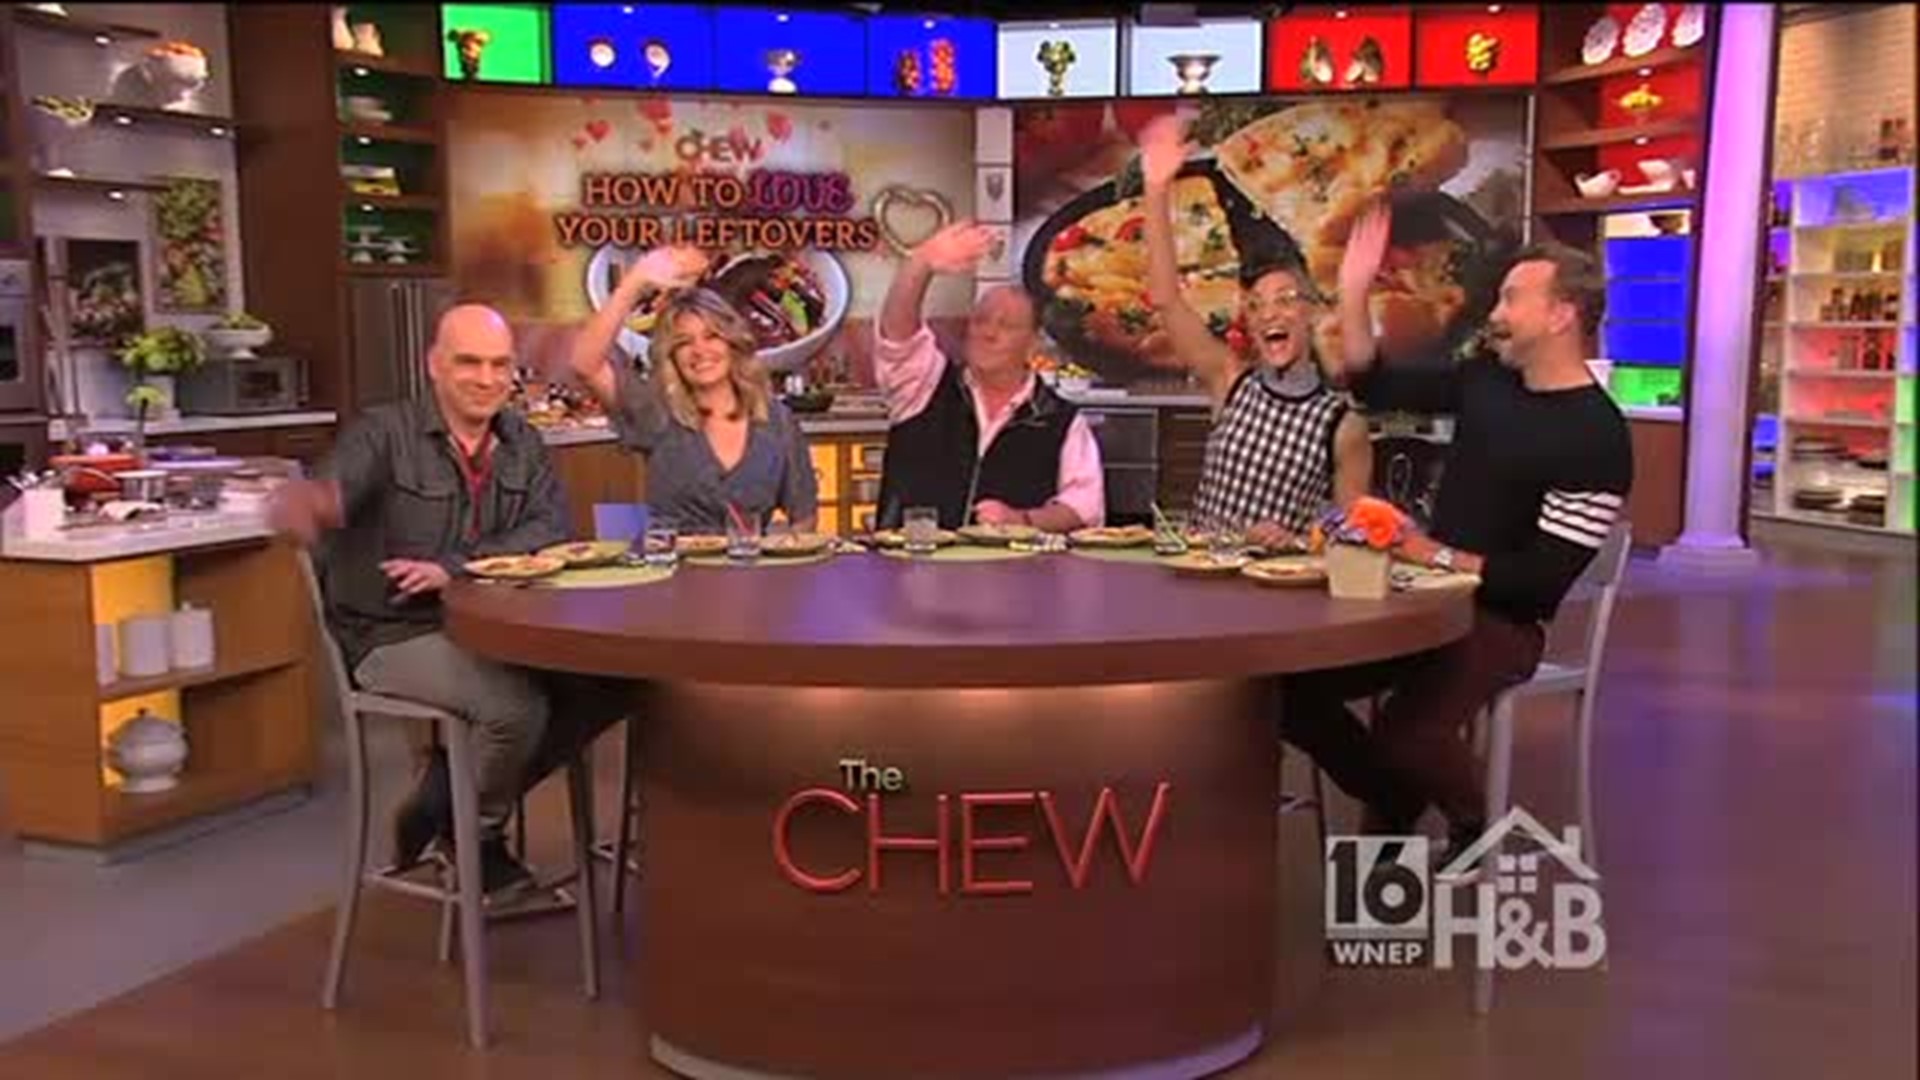 WNEP Goes Behind the Scenes at The Chew